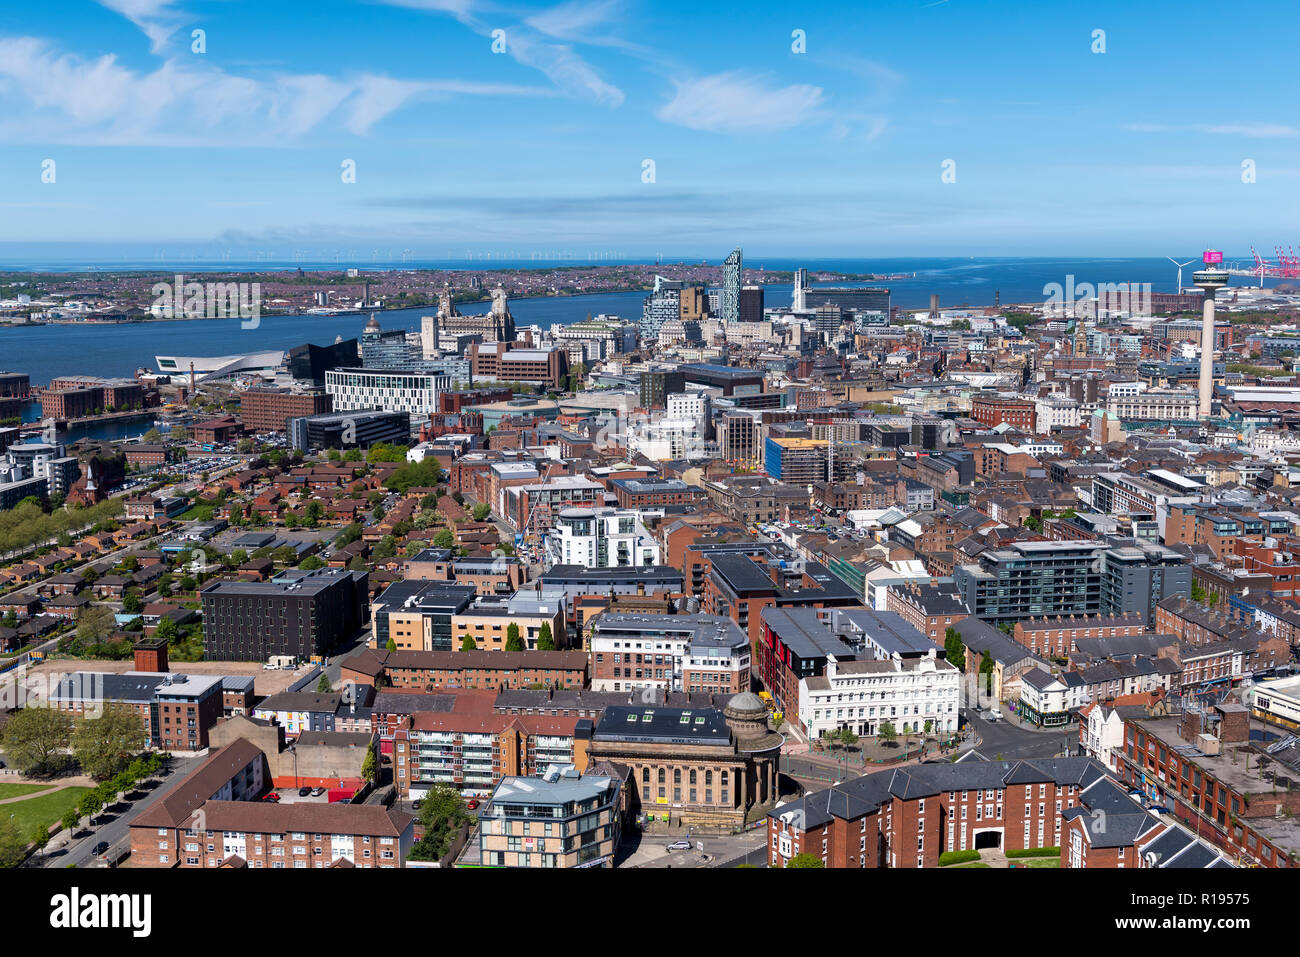 View of Liverpool City Centre skyline looking towards the River Mersey, Wirral, and Crosby in the distance Stock Photo